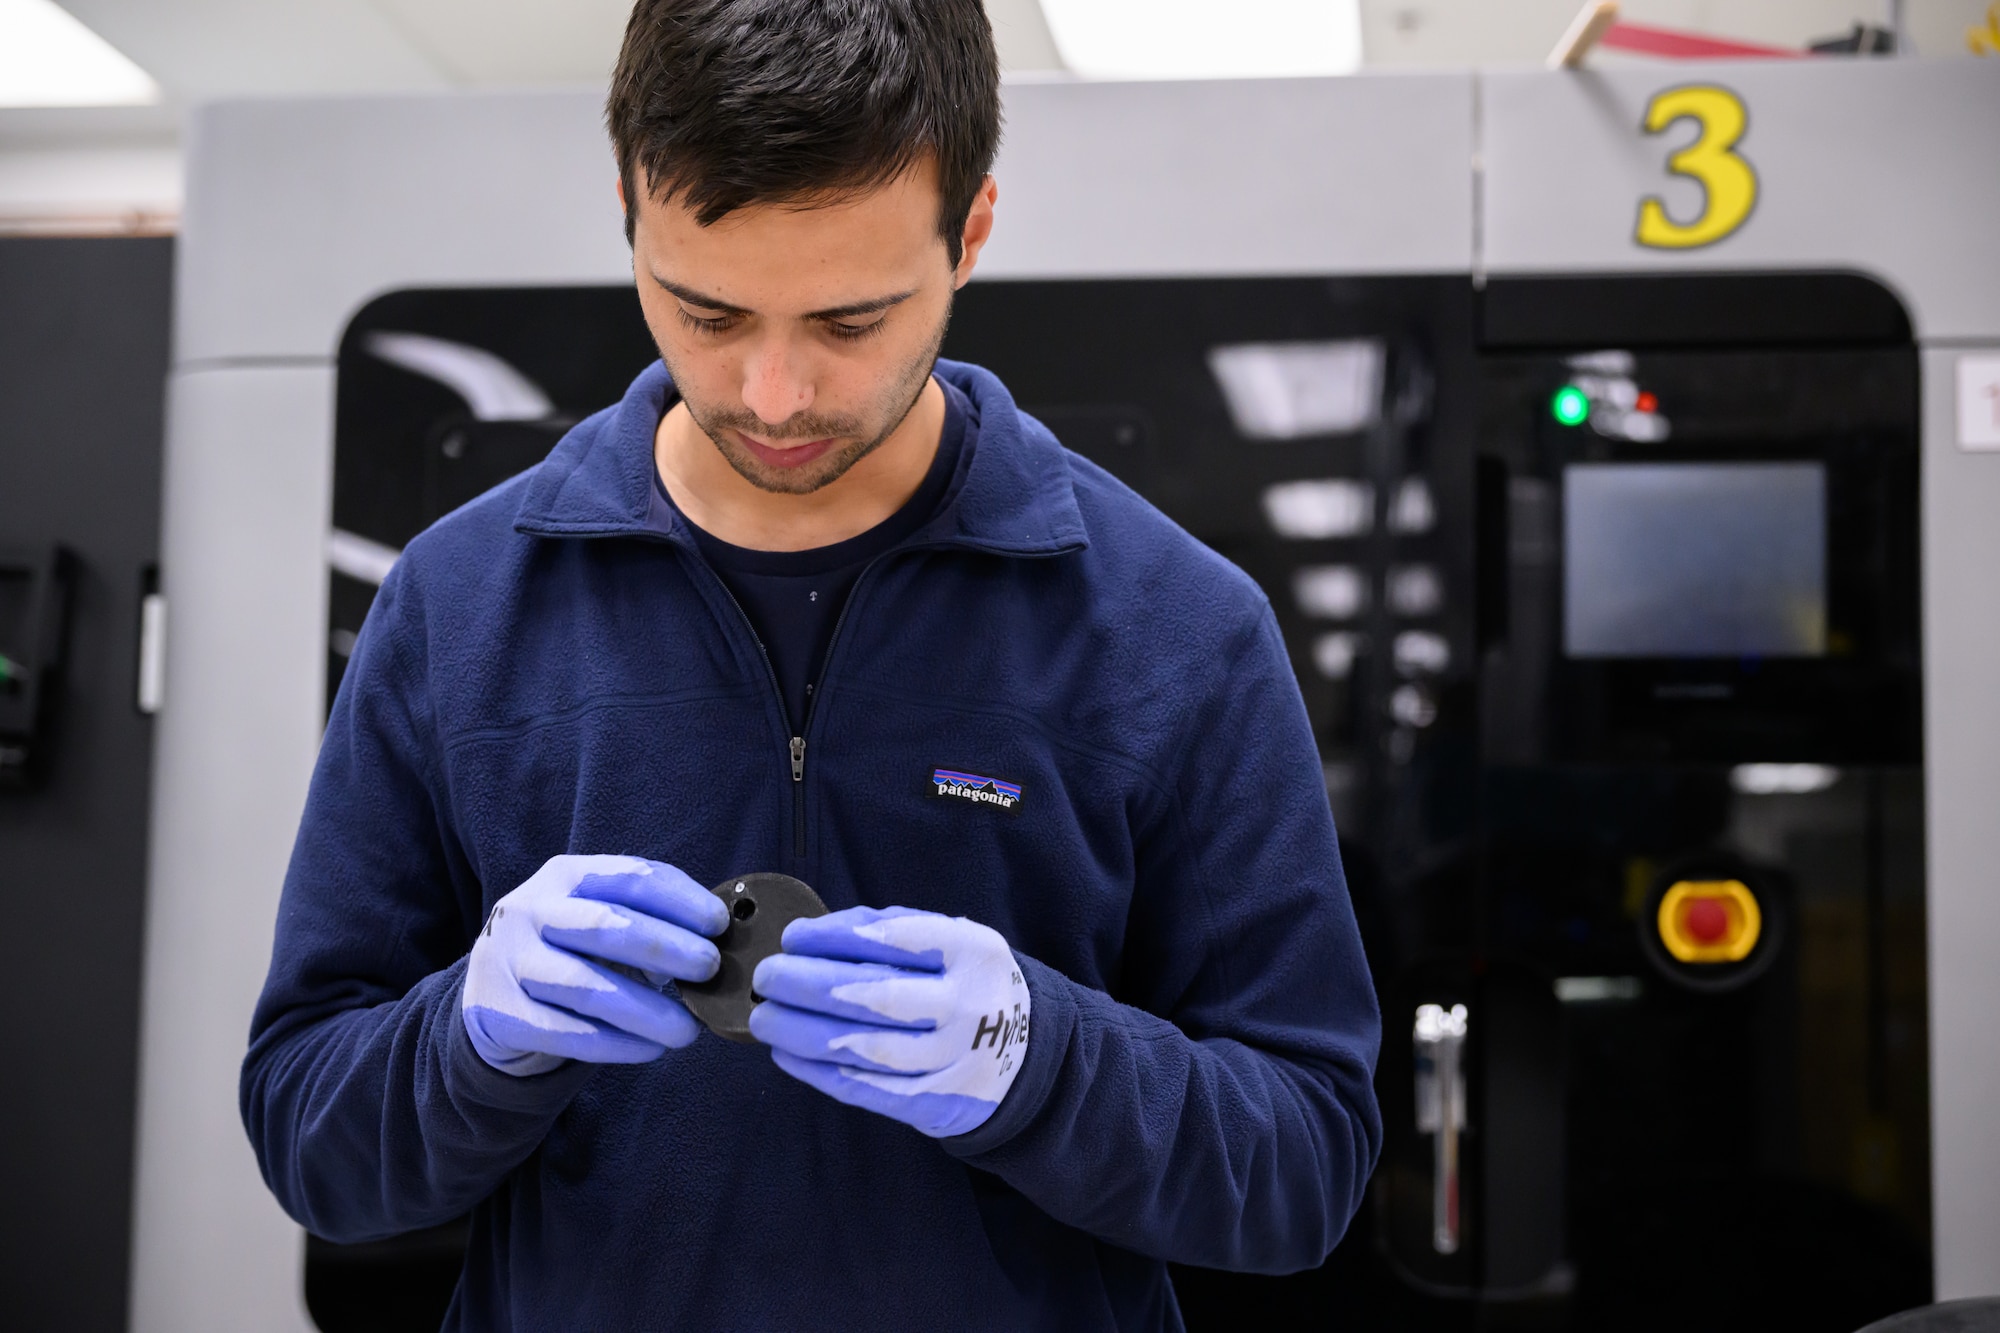 Ricardo Nicolia, 809th Maintenance Support Squadron mechanical engineer, inspects a 3D printed part at Hill Air Force Base, Utah, Dec. 2, 2022. (U.S. Air Force photo by R. Nial Bradshaw)